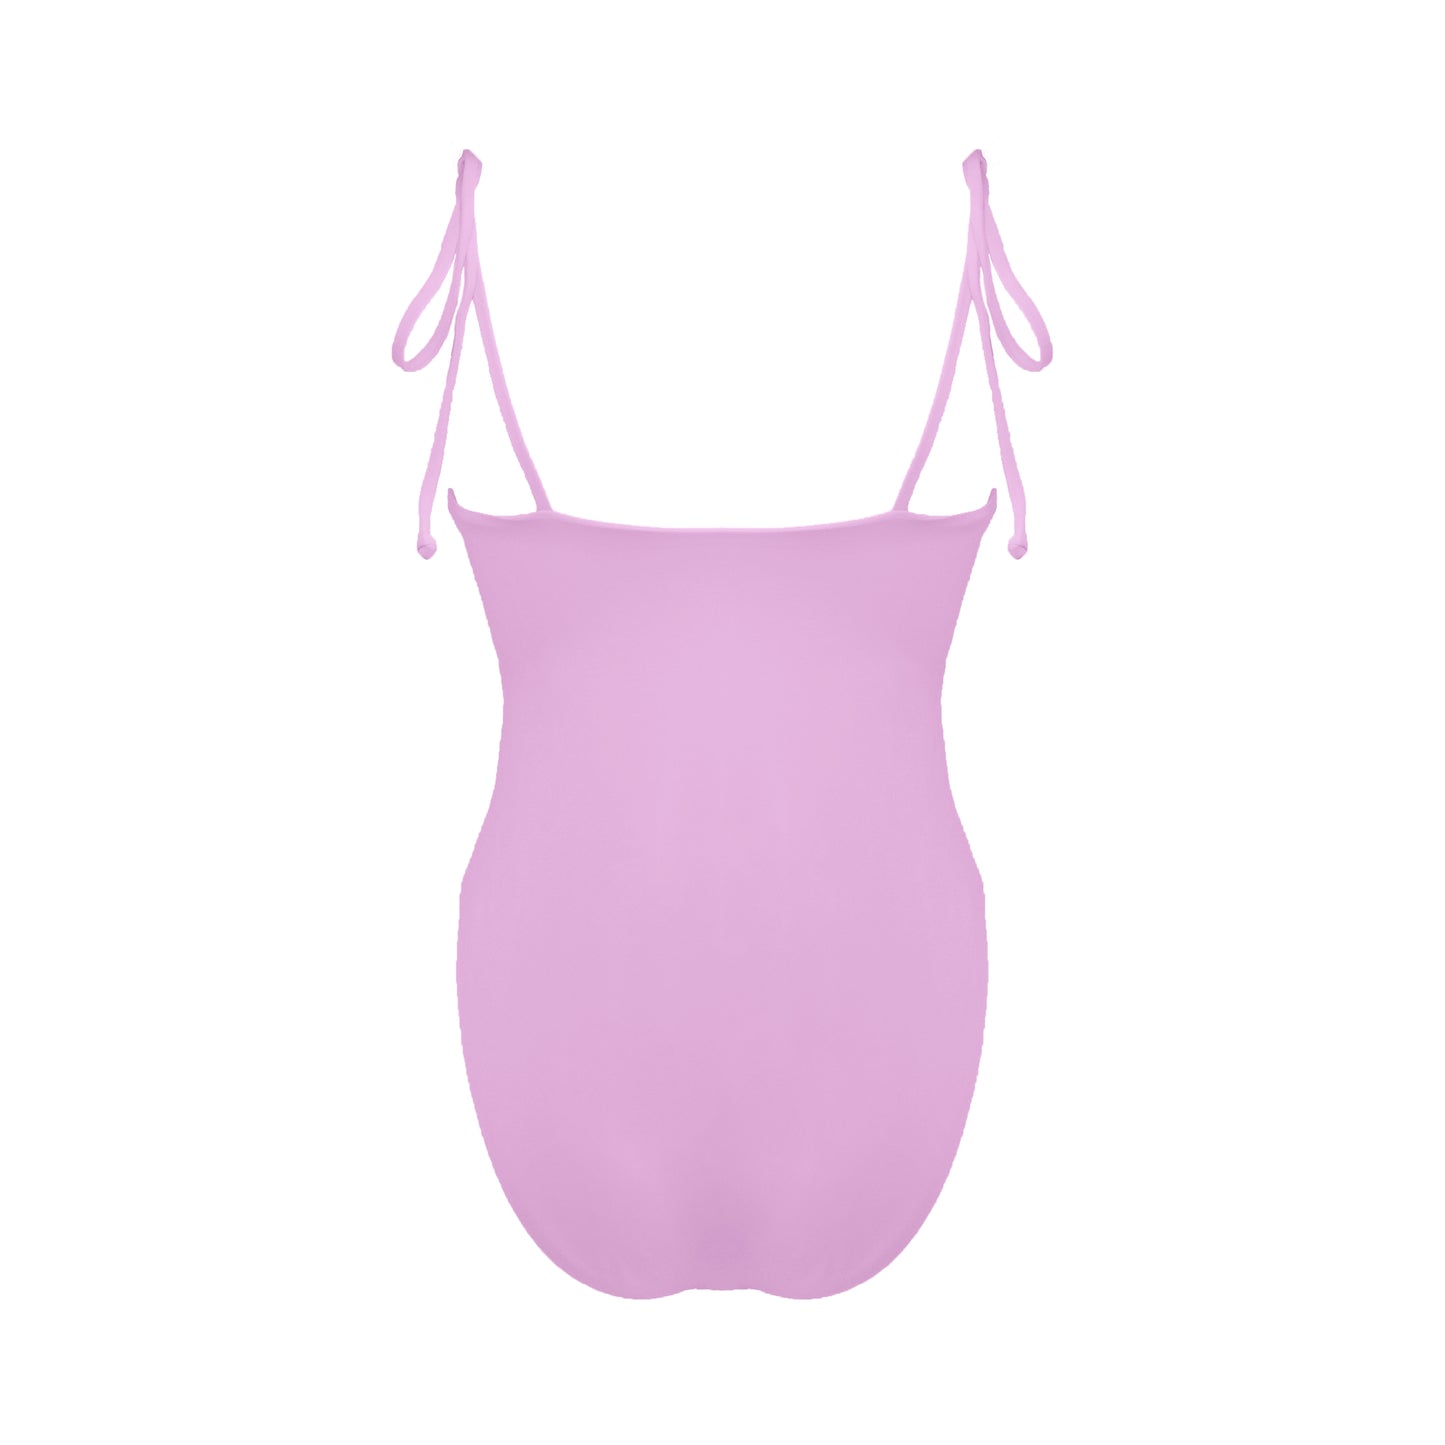 Back view pastel pink straight Tuscany neck one piece swimsuit with adjustable tie shoulder straps and full bum coverage